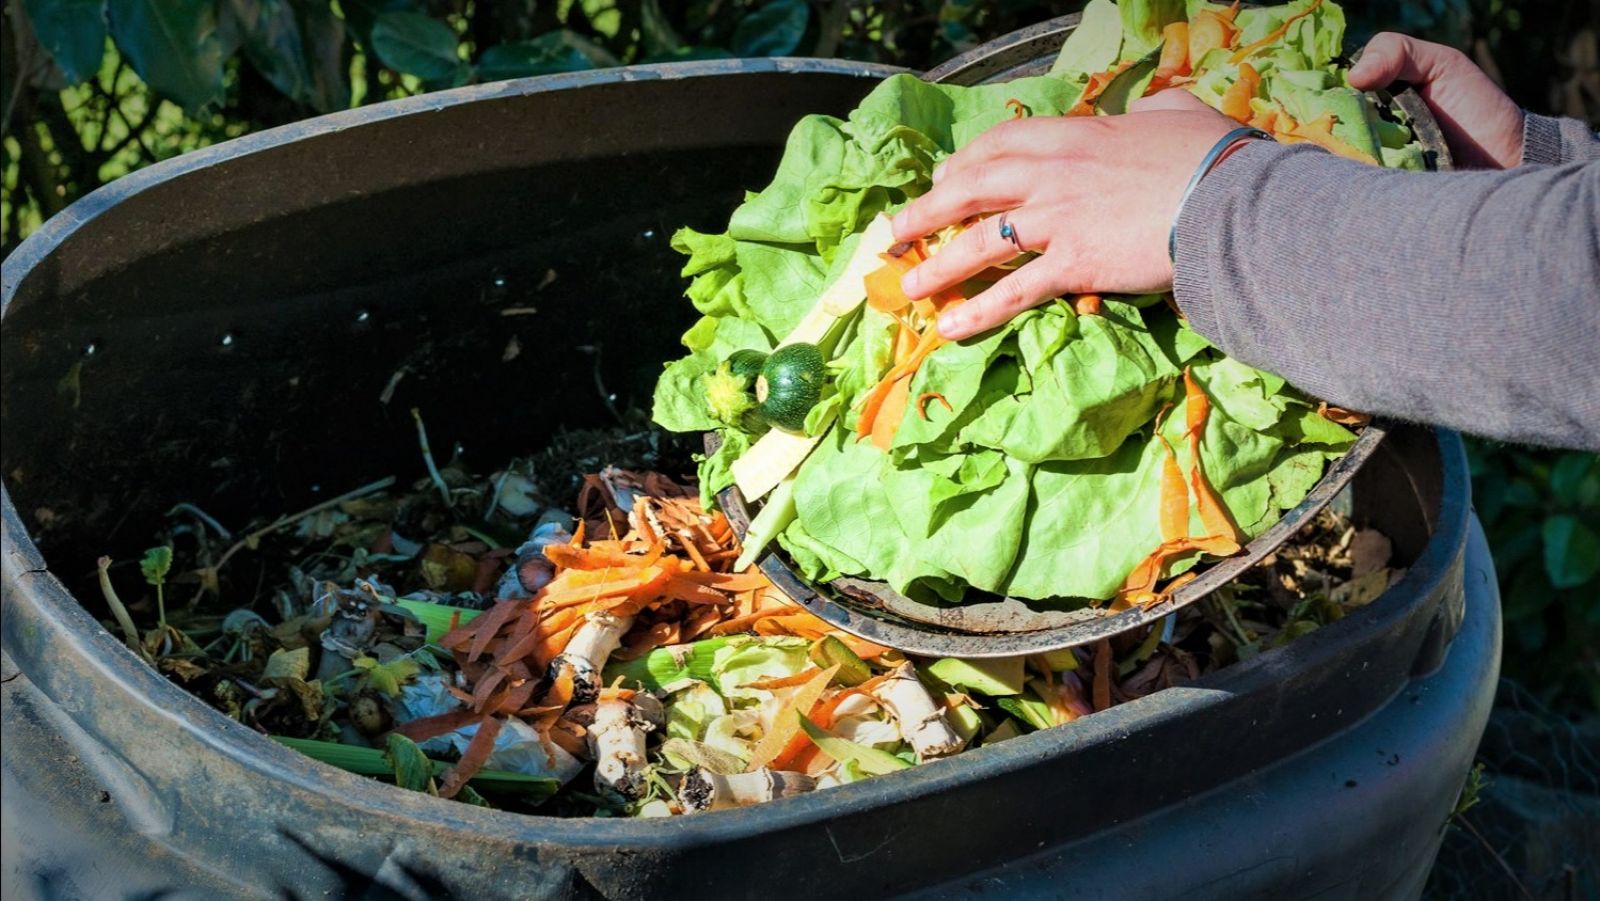 Close up image of person's hands holding compost banner image